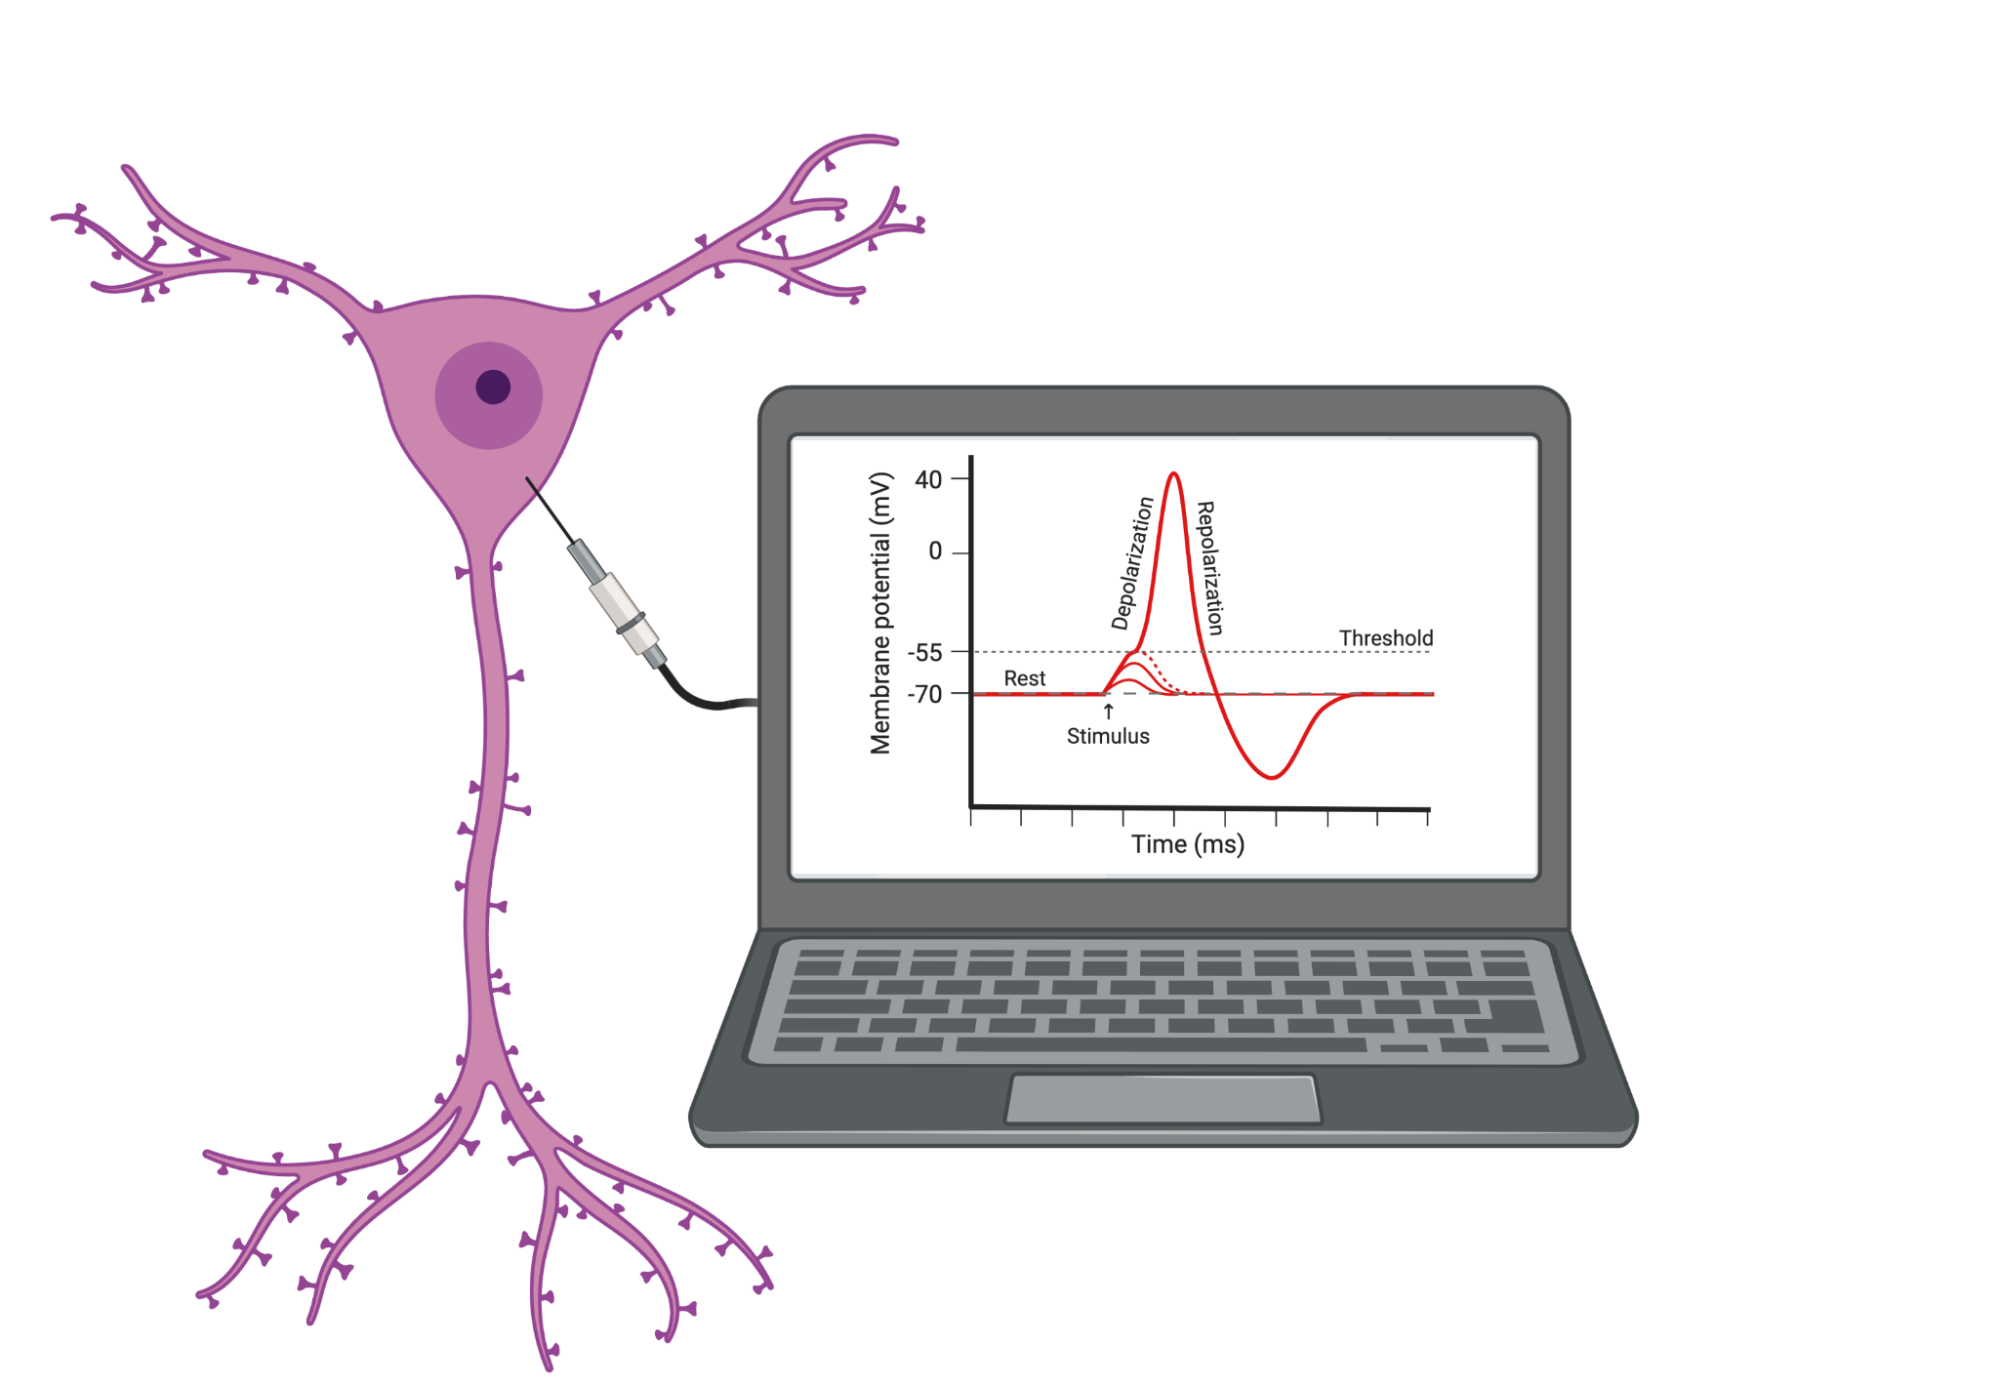 A large neuron is shown with an electrode inserted into the cell body. The electrode is connected to a wire leading to a computer, which shows a graph depicting the typical phases of the action potential. The action potential starts at rest, hits threshold, then the membrane potential increases during depolarization, decreases again during repolarization, and eventually comes back up to rest.